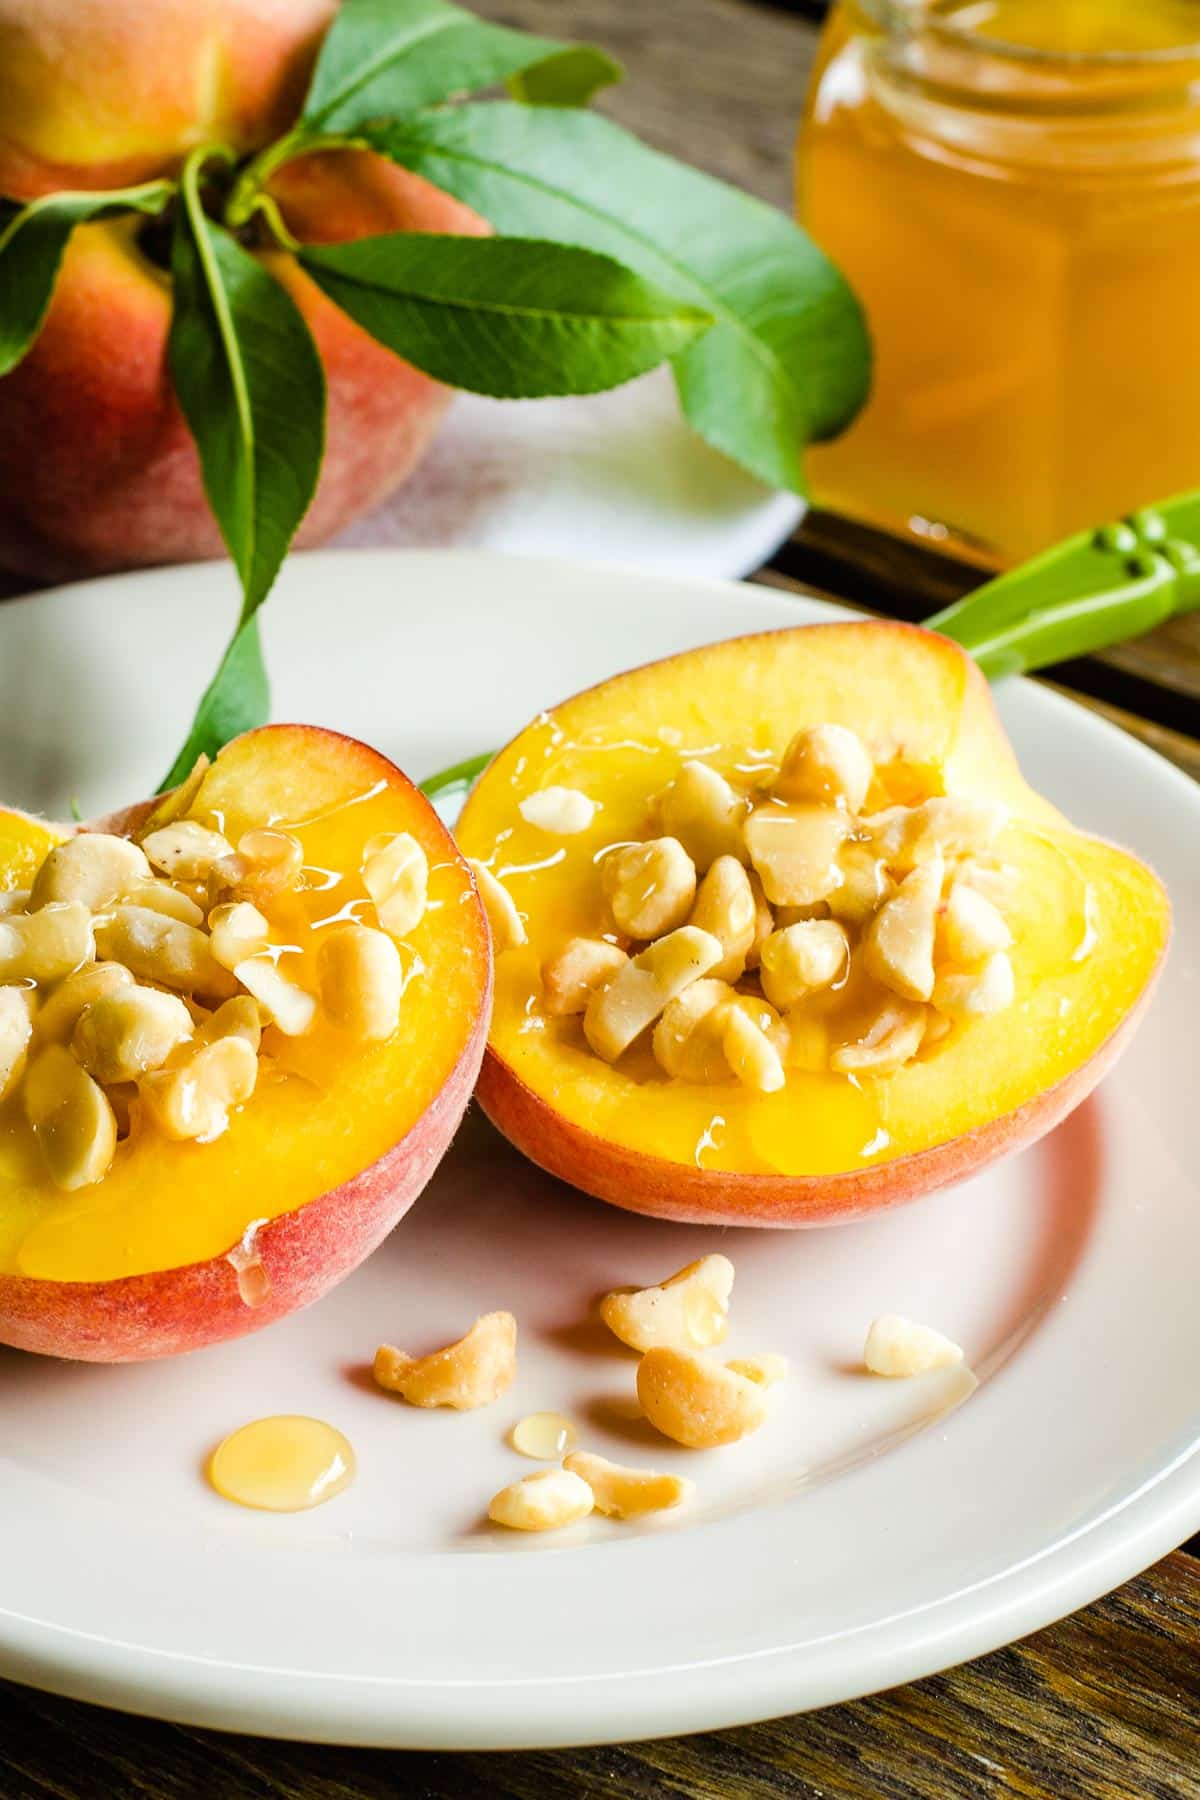 Peaches with macadamia nuts and honey on white plate.